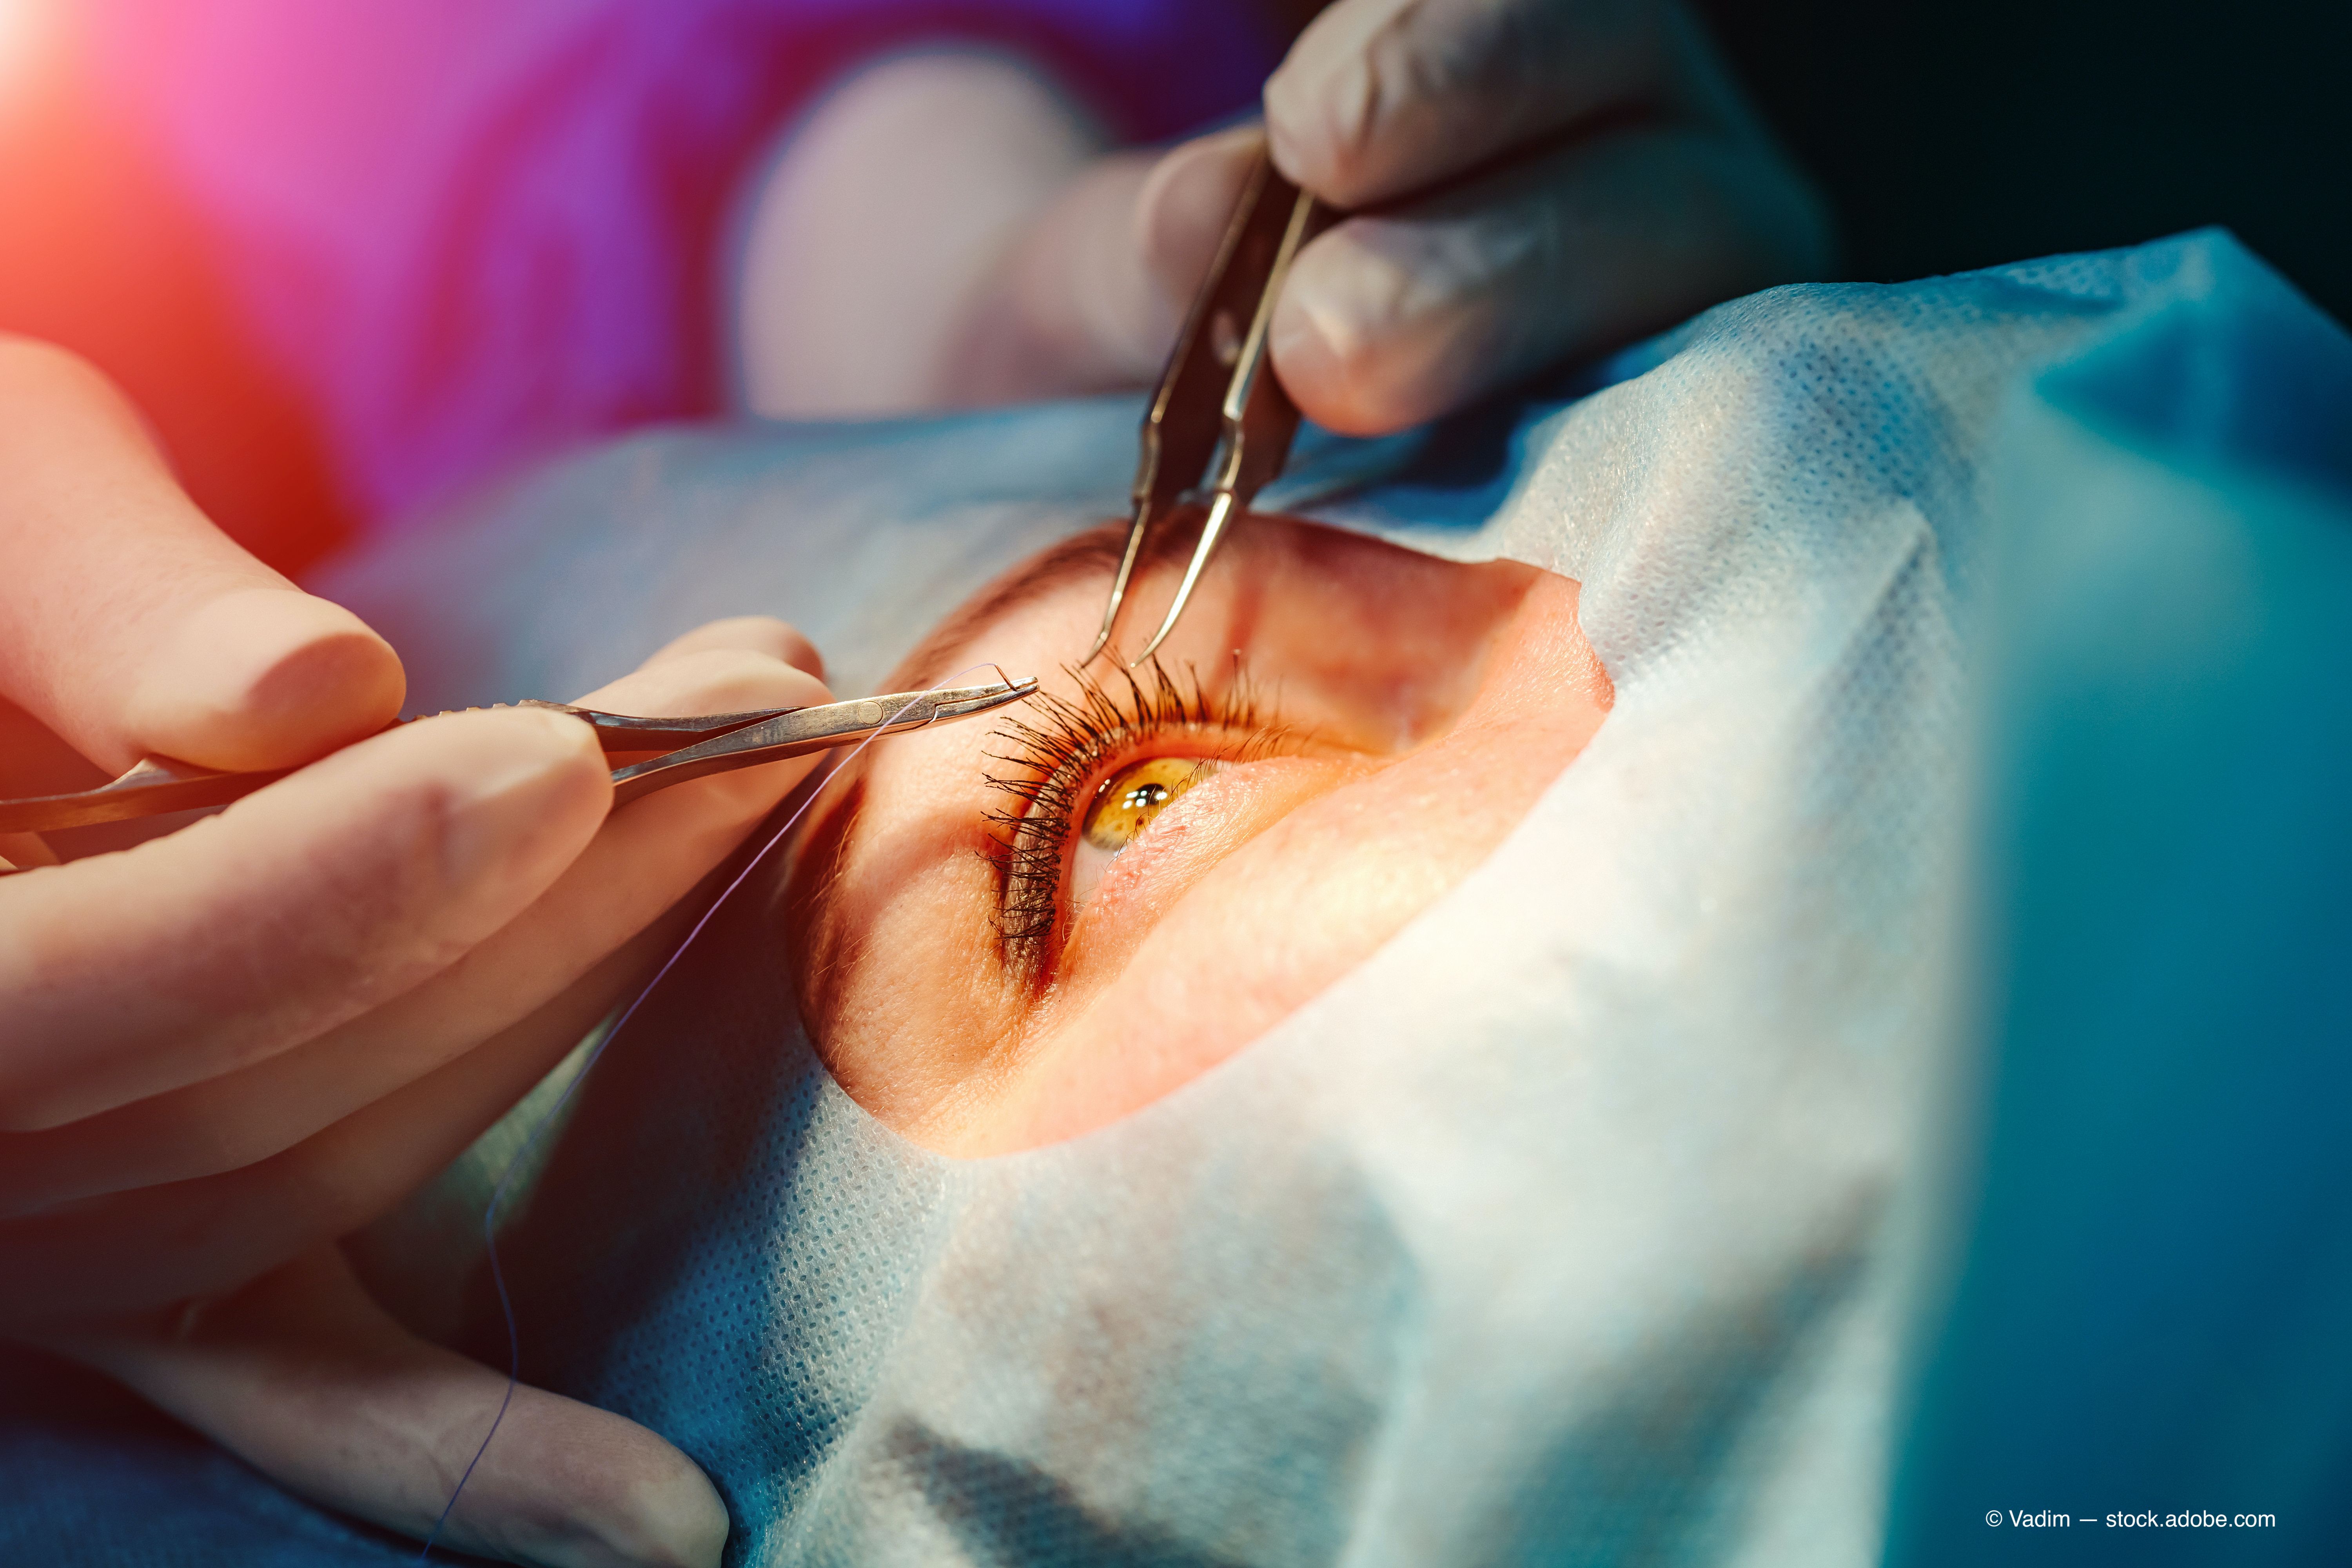 Celebrating a pivotal moment in laser-vision correction history 